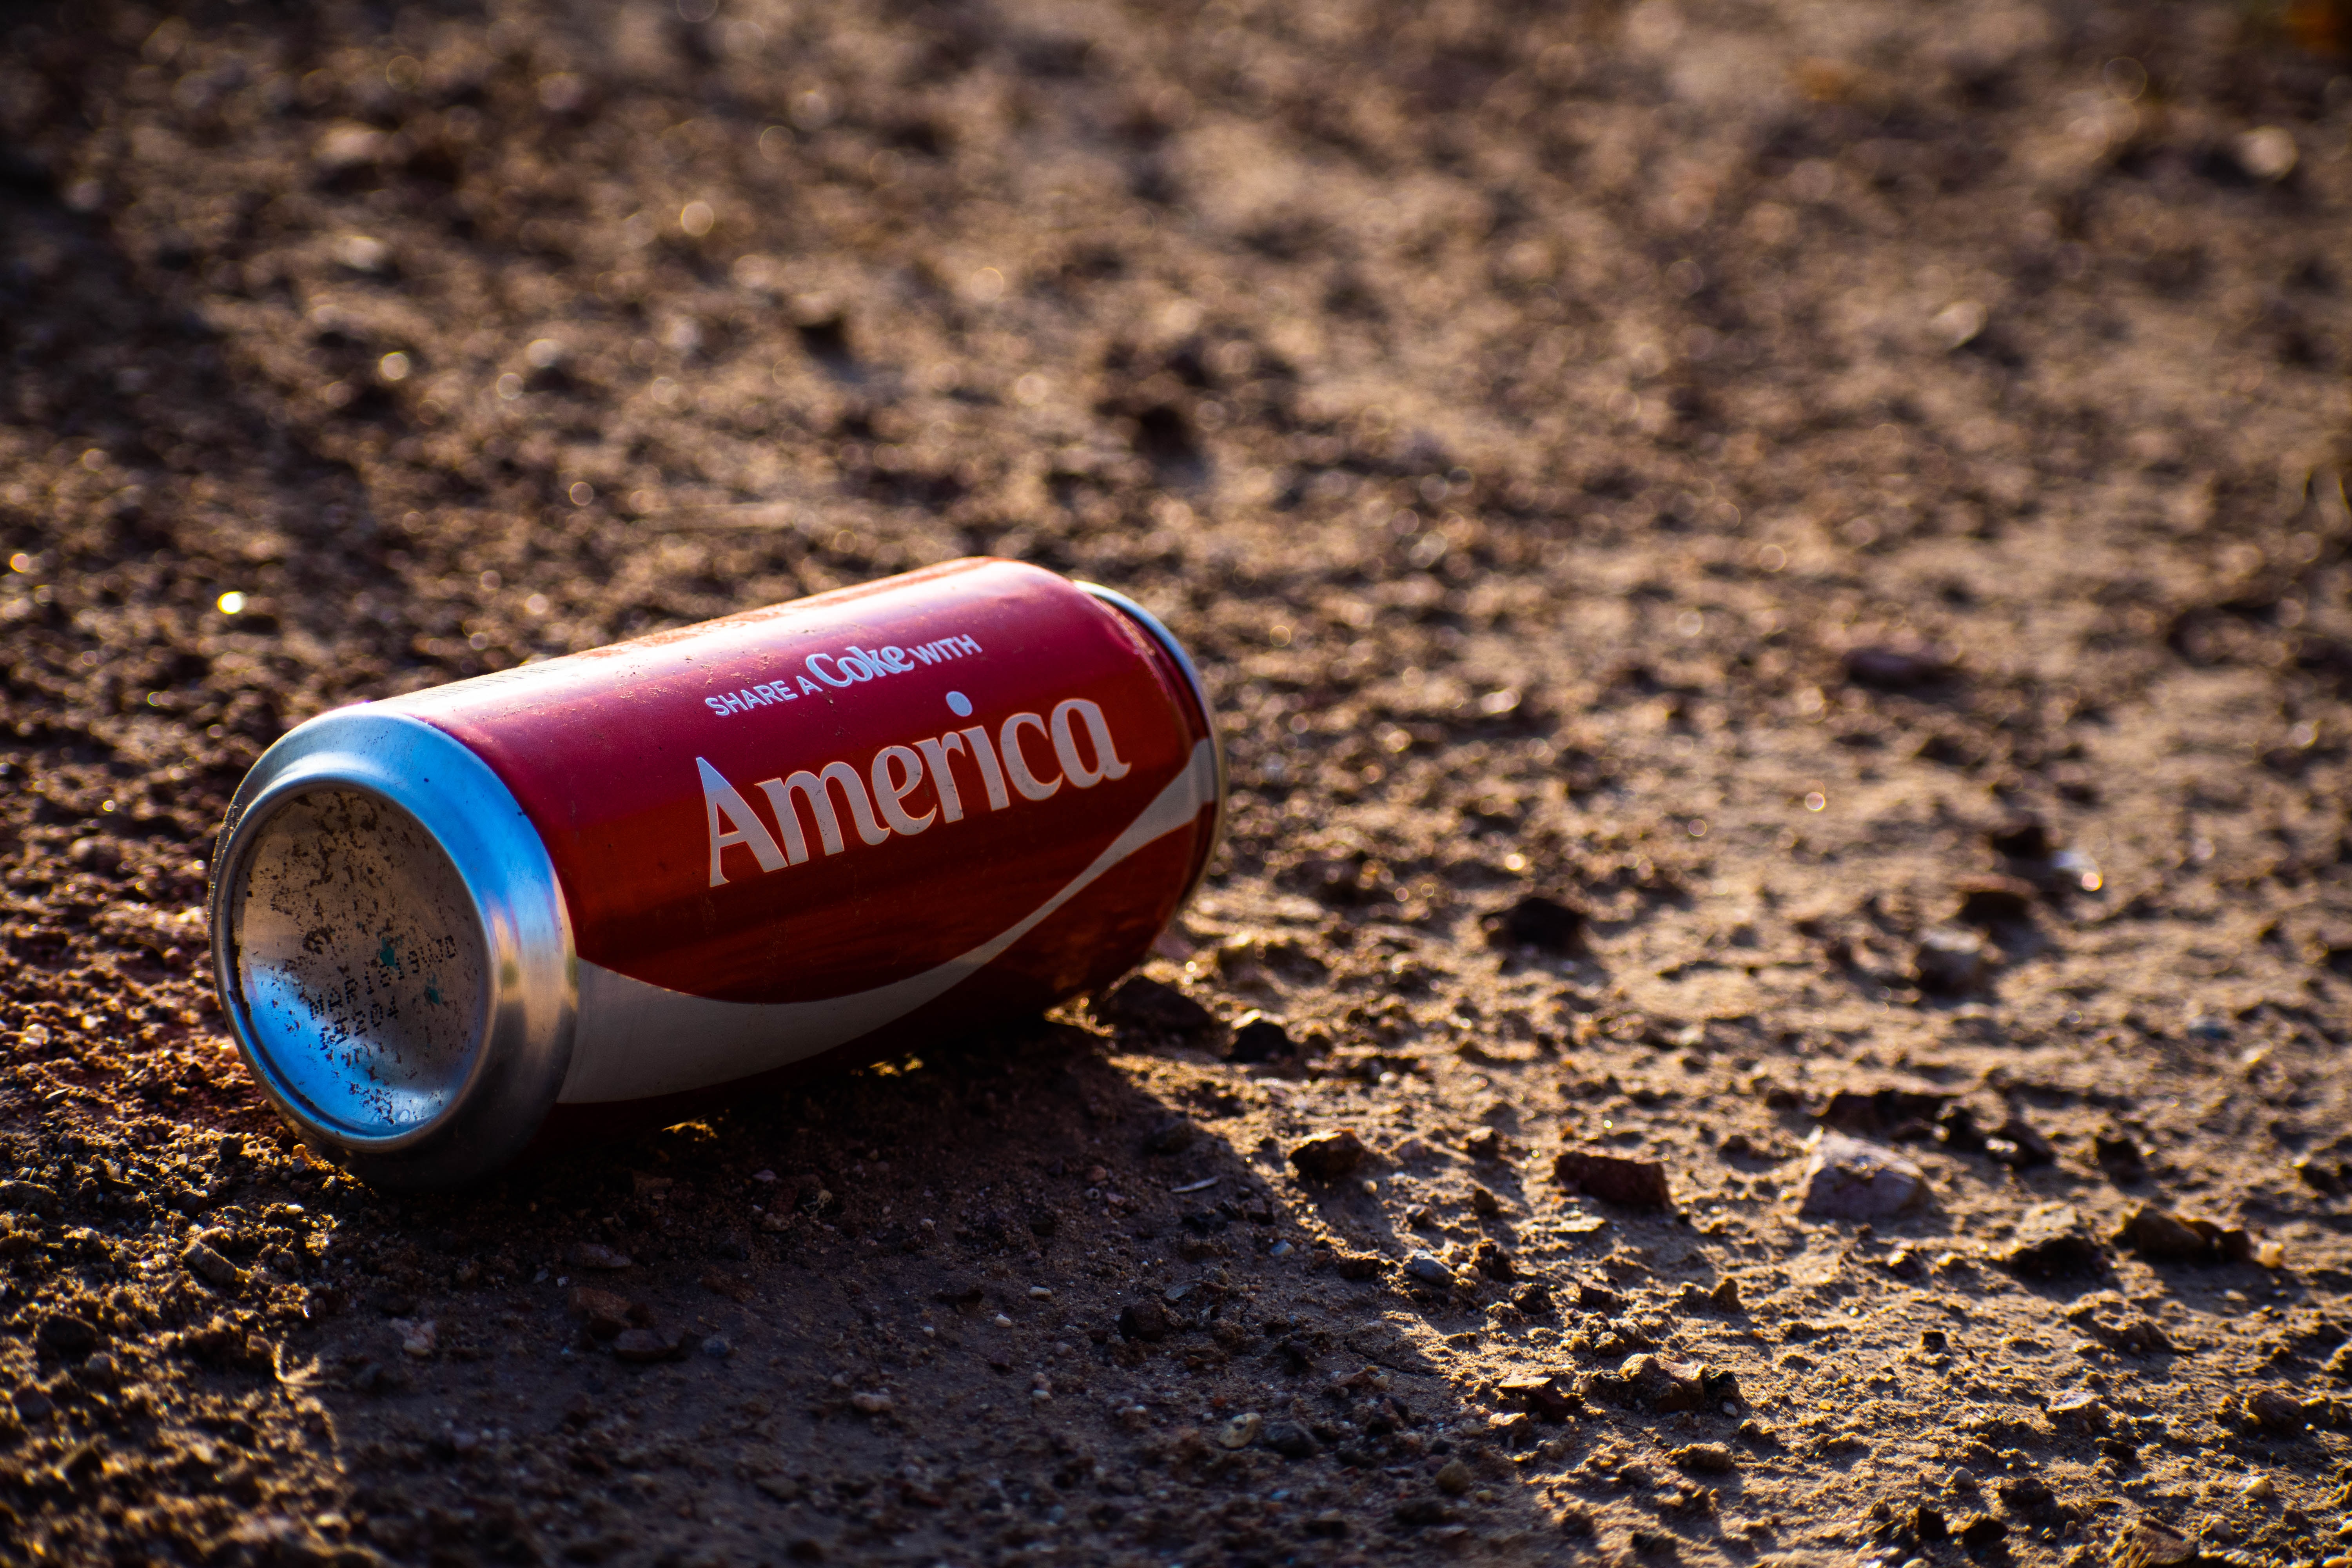 Aluminum Can on the ground with the word "America", intended to make us think of our stewardship responsibility to the planet and others.